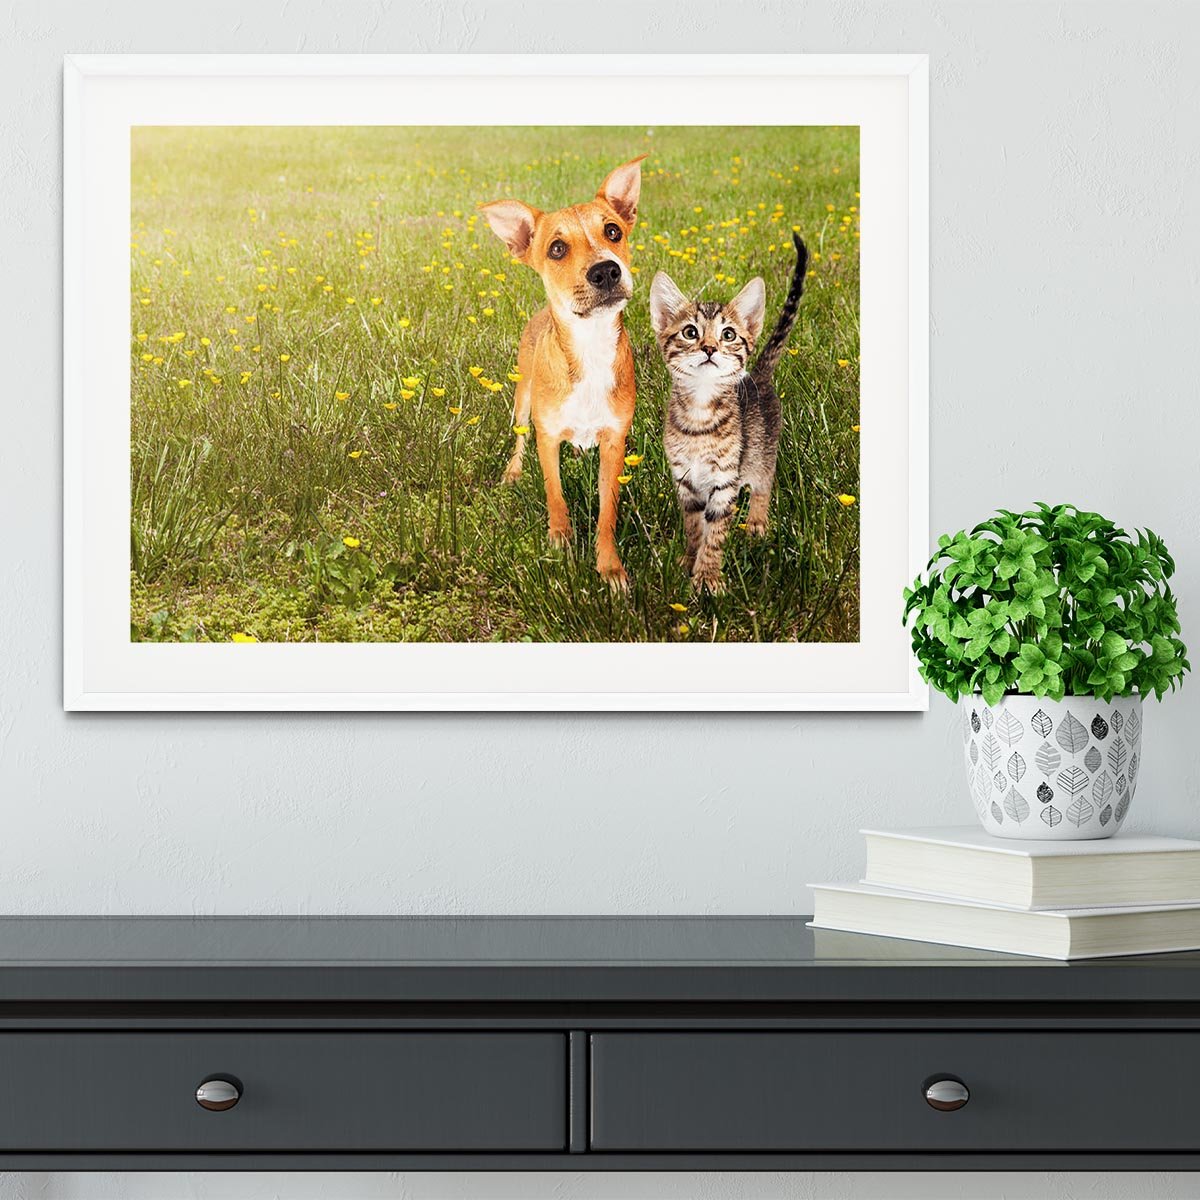 Cute kitten and puppy together in a field Framed Print - Canvas Art Rocks - 5